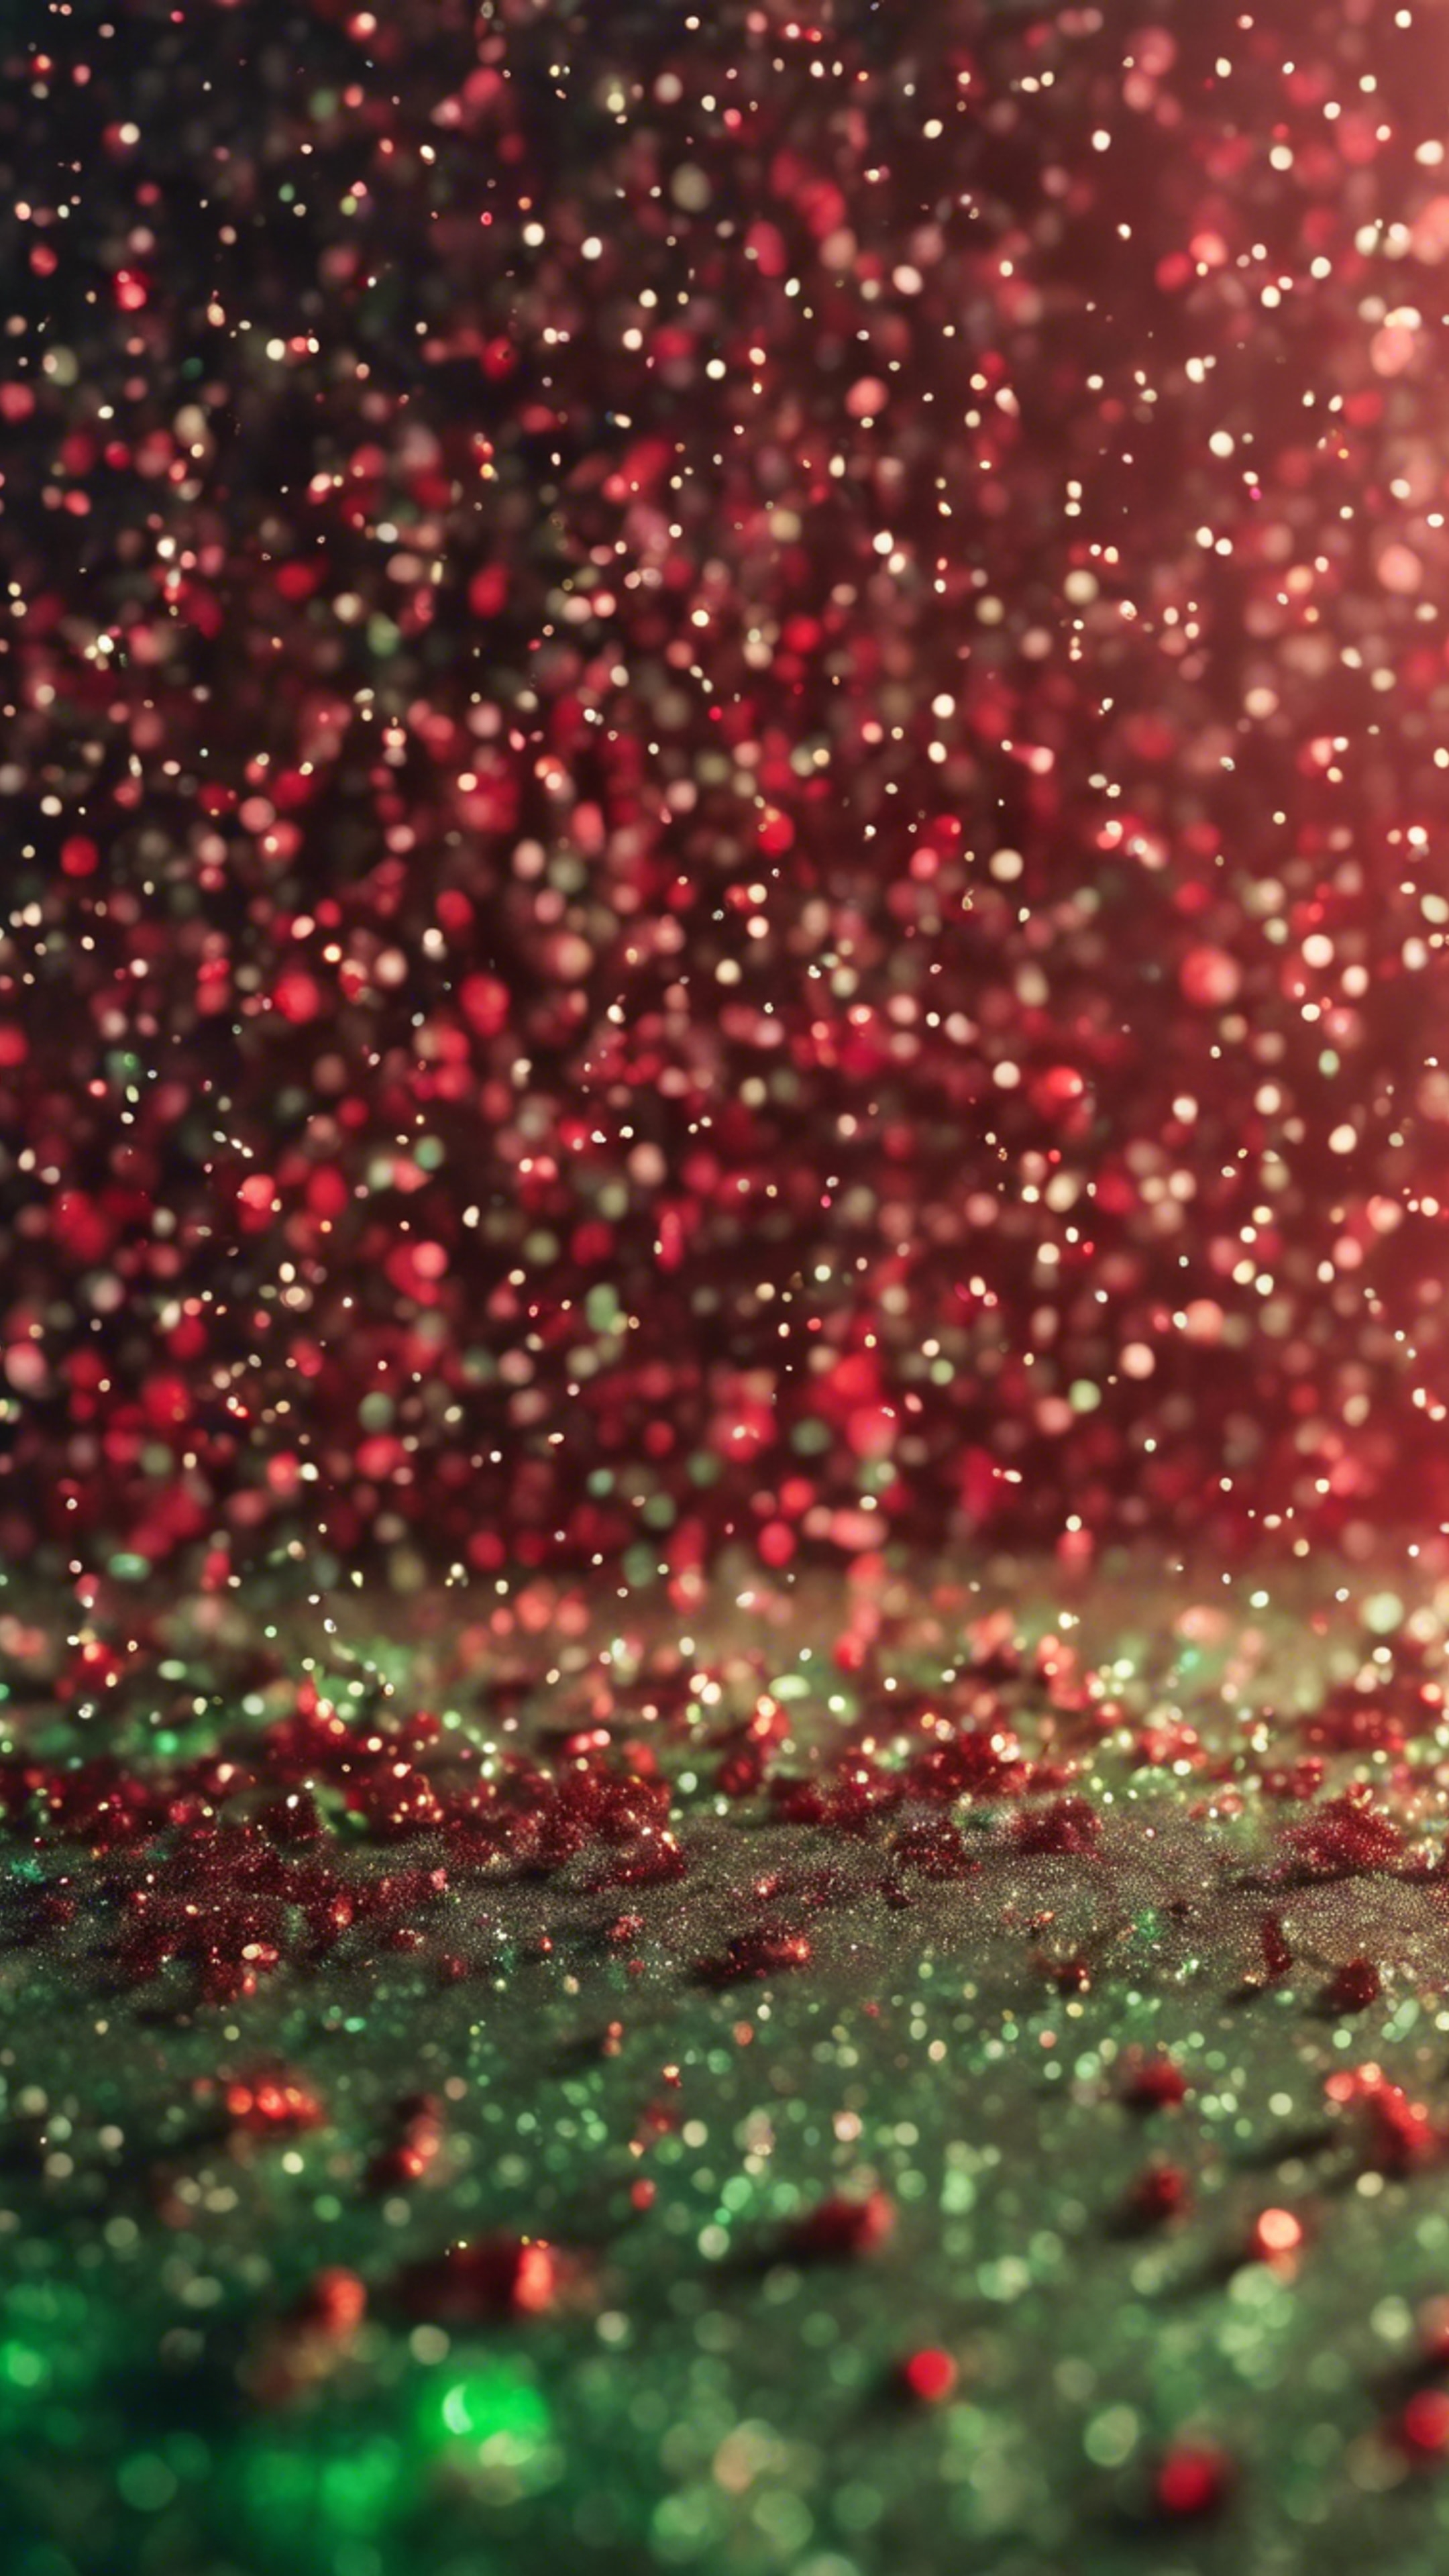 Tiny green and red glitter particles scattered randomly Валлпапер[e9e8f5a2023d489ba4c1]